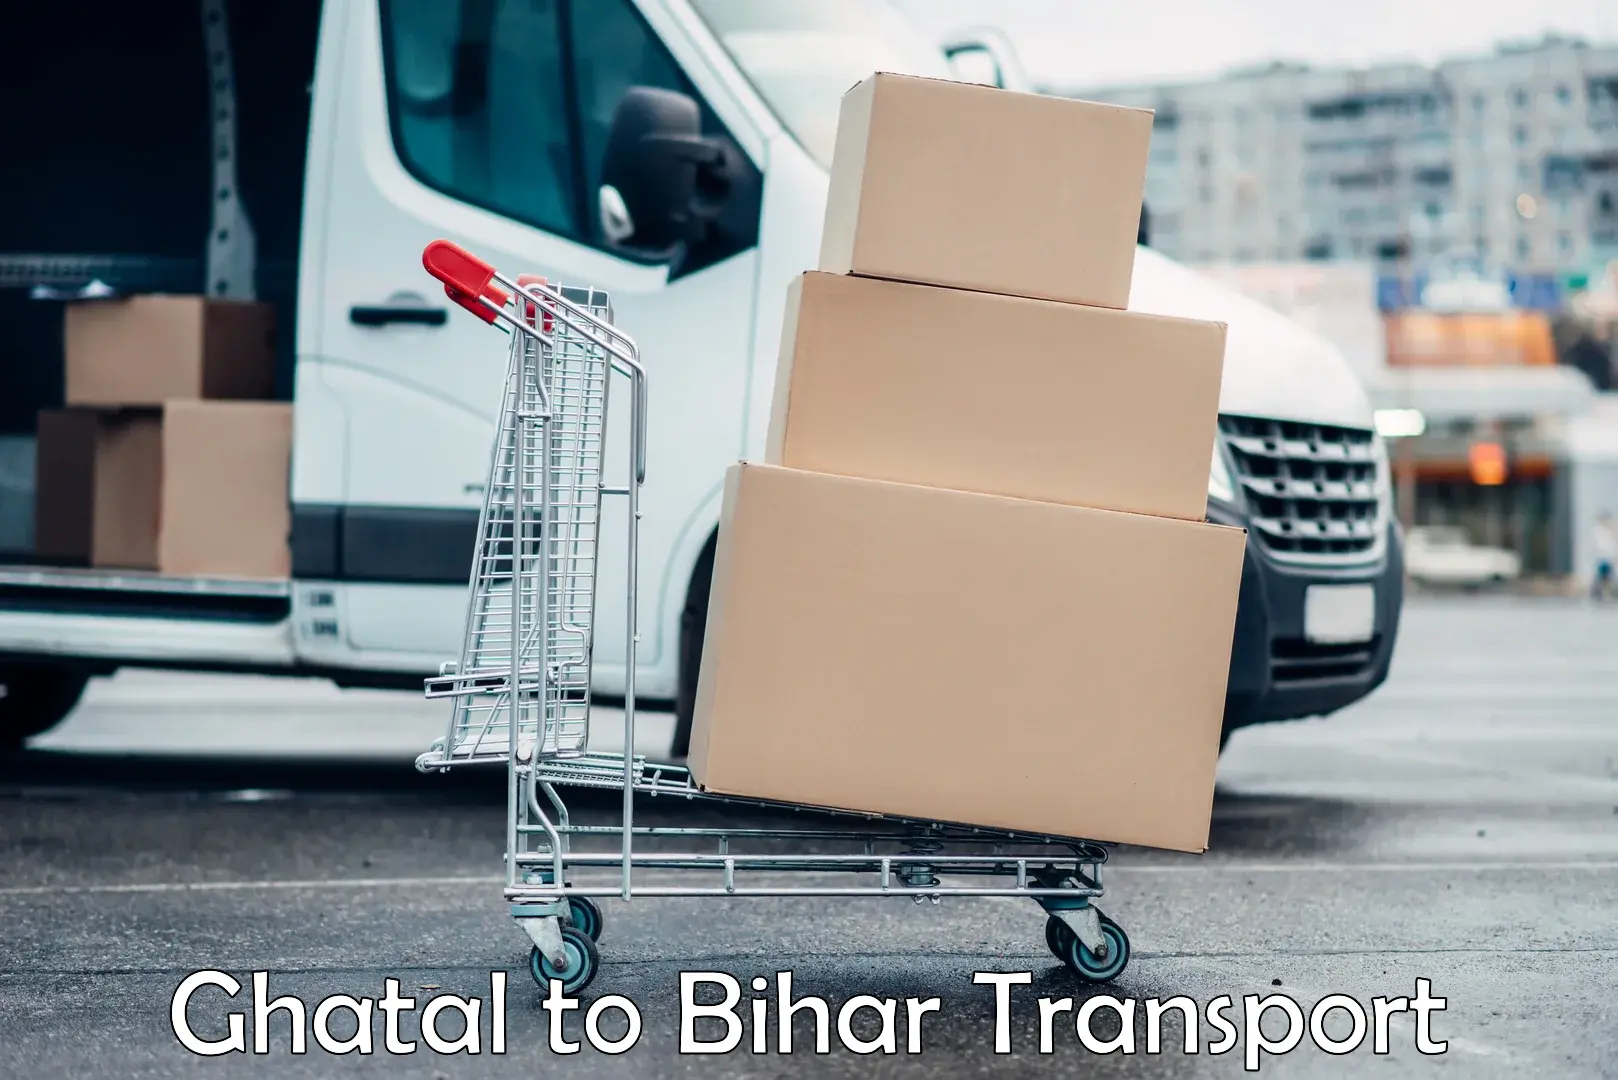 Truck transport companies in India Ghatal to Jehanabad